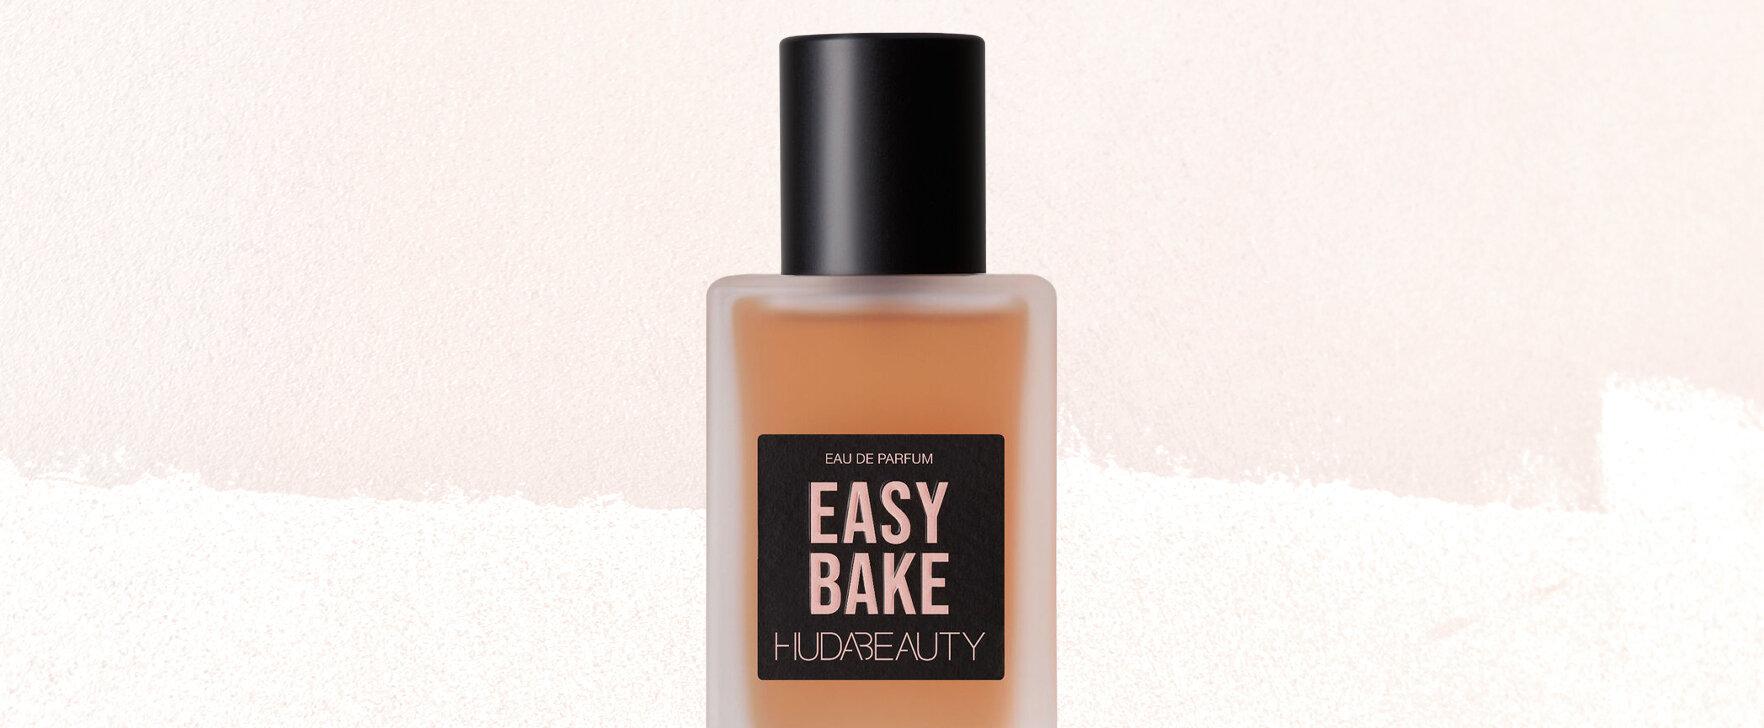 From Powder to Perfume: The Limited-Edition Eau de Parfum "Easy Bake" From Huda Beauty